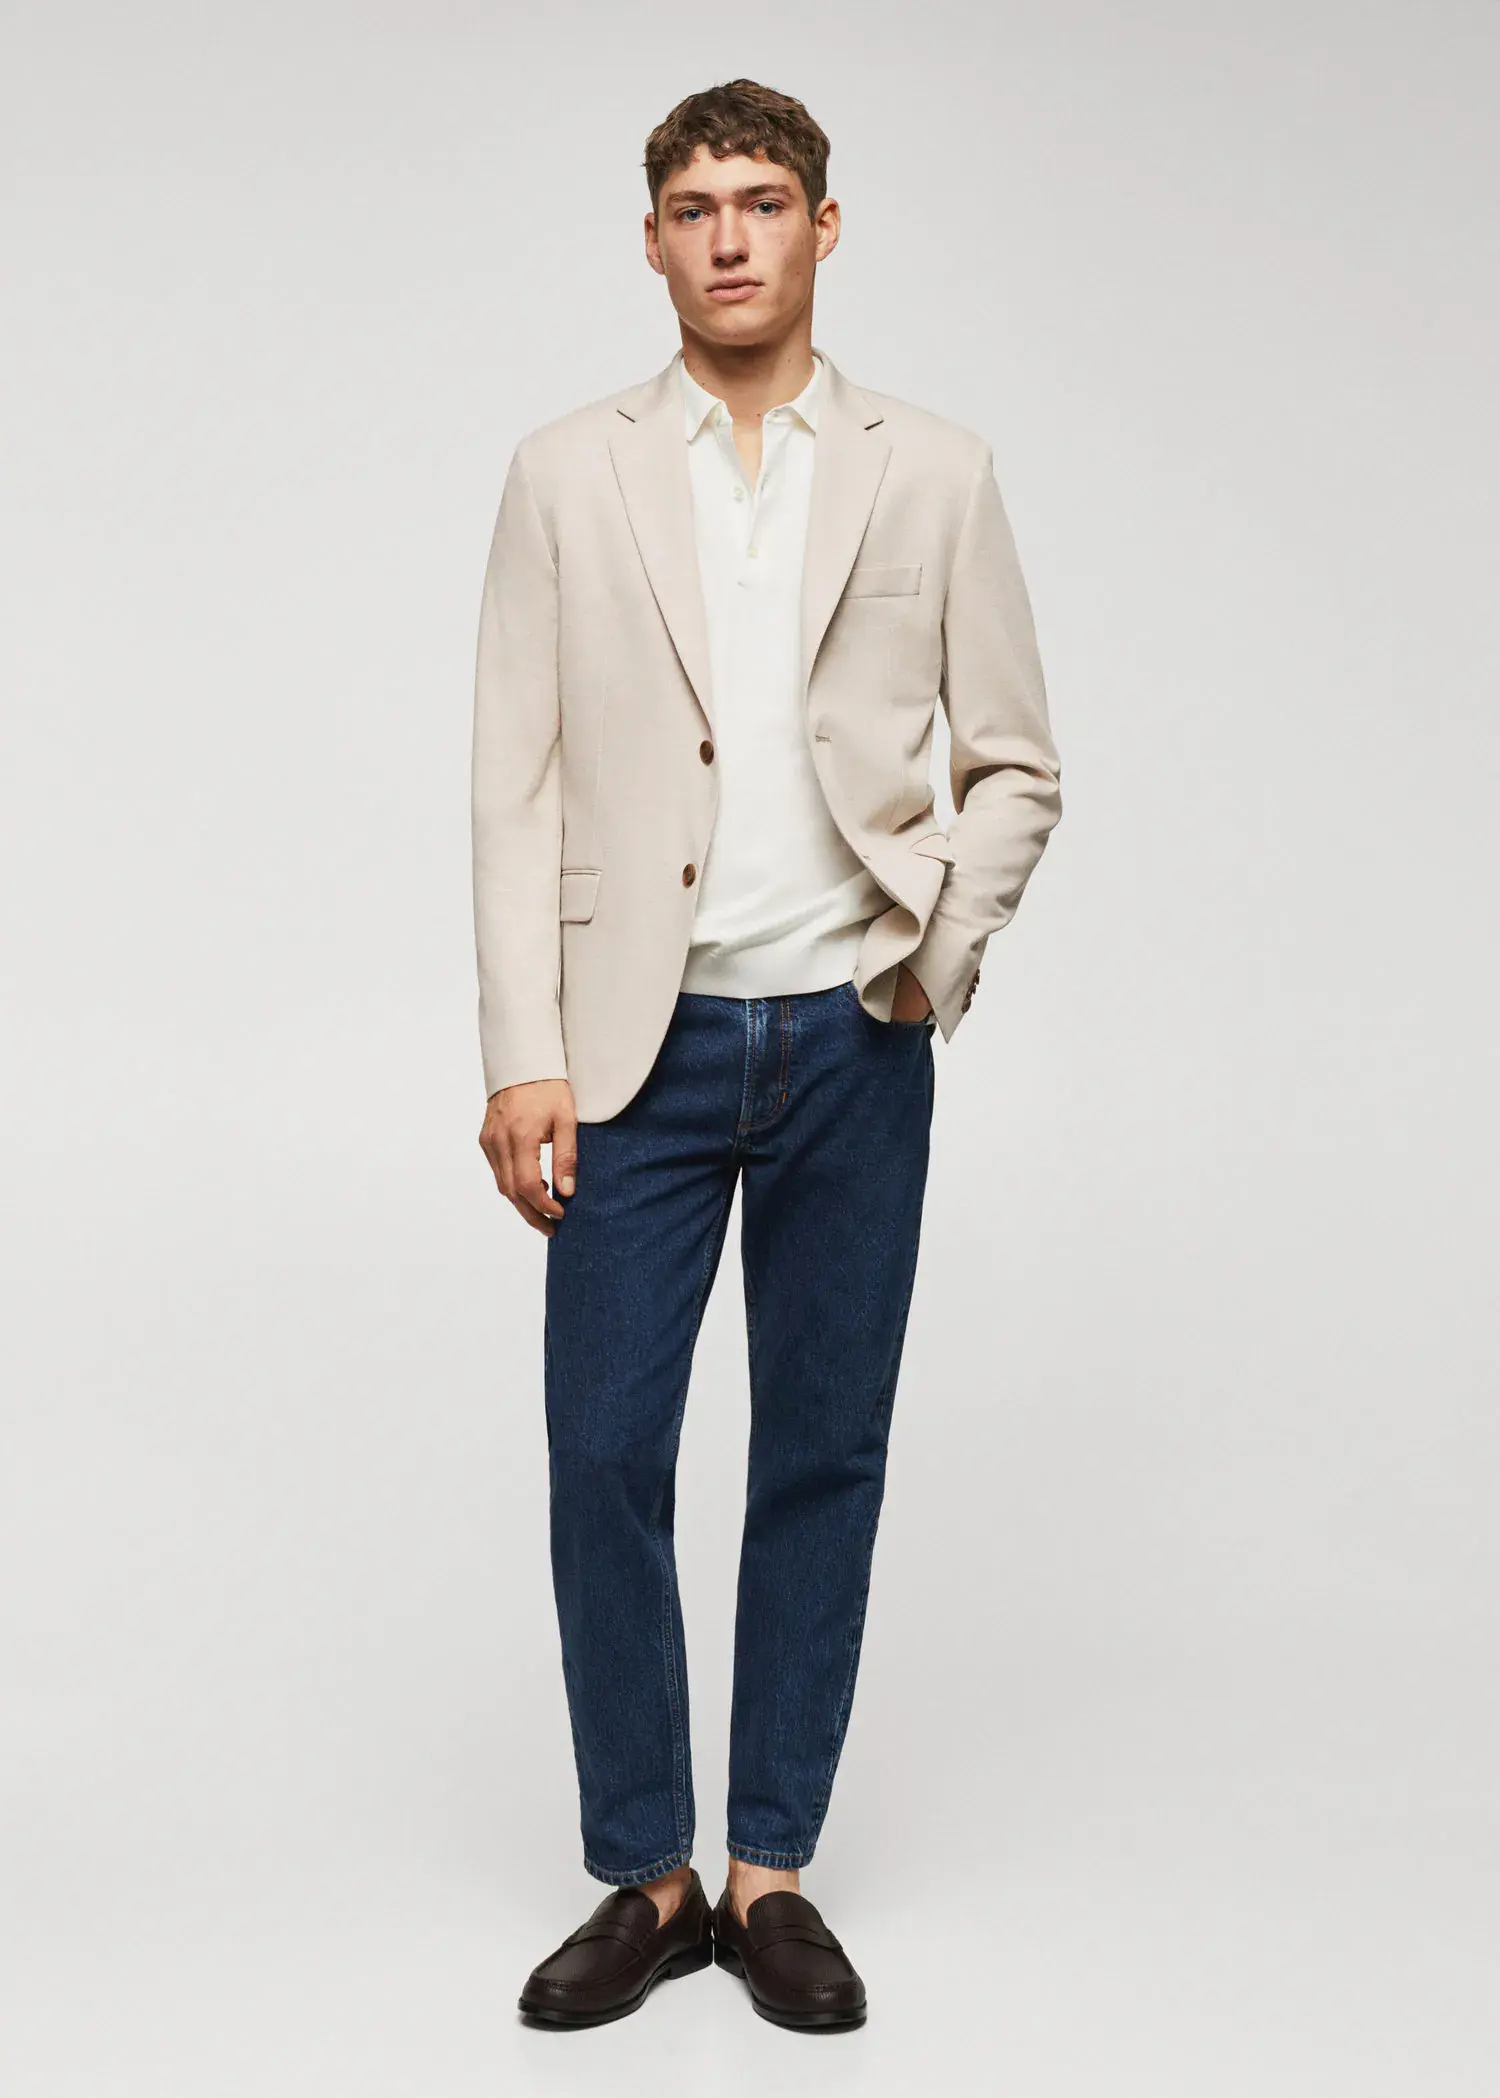 Mango Slim fit microstructure blazer. a man in a beige jacket and blue jeans. 